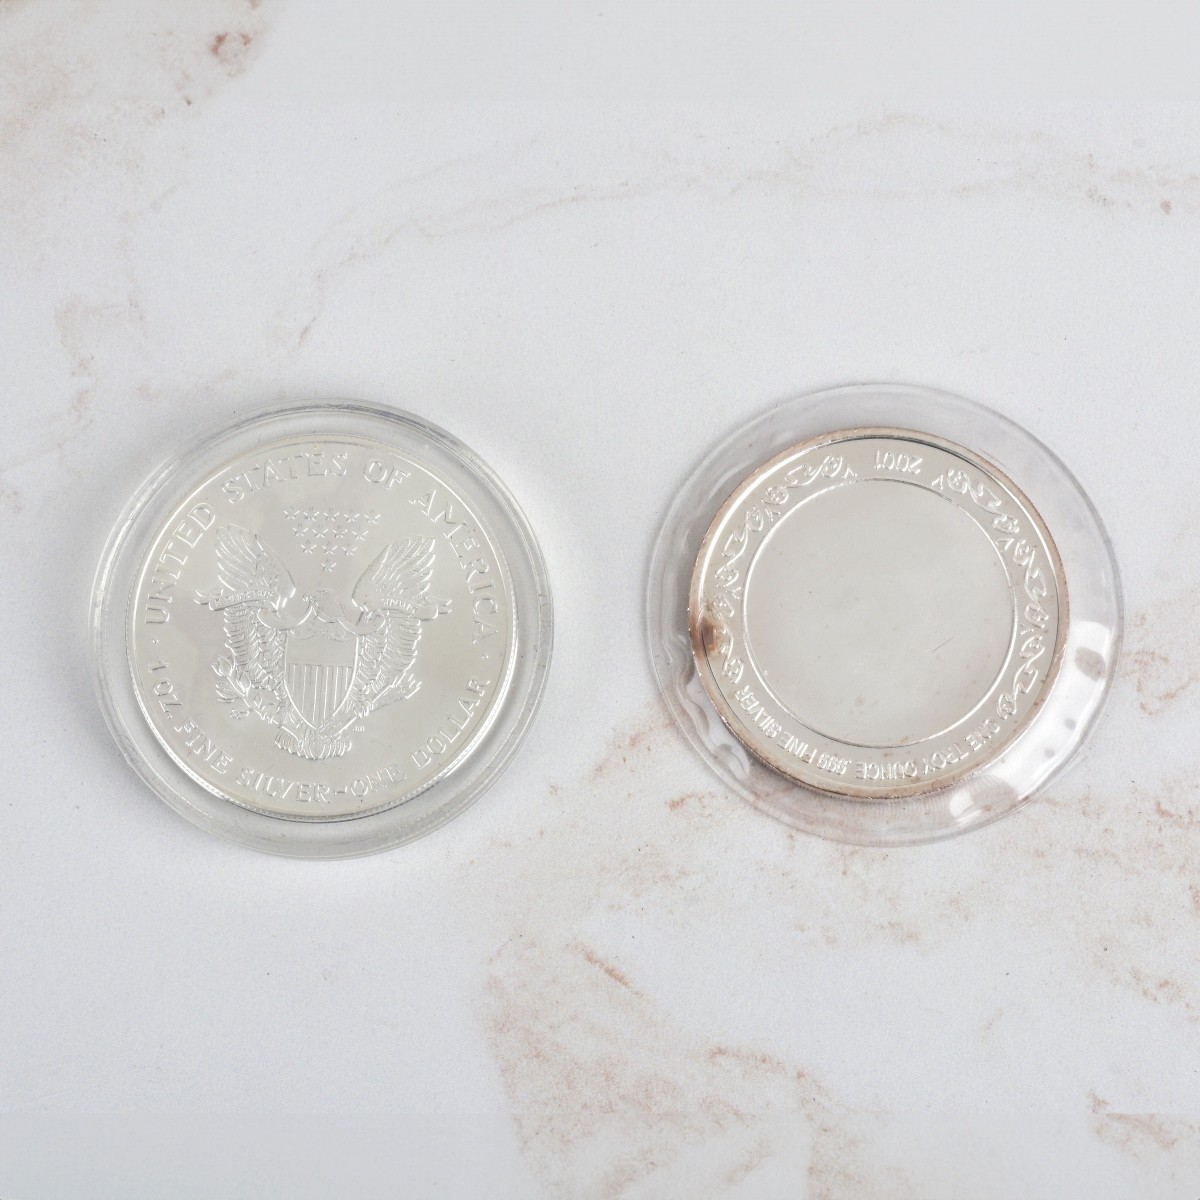 Two Silver Coins